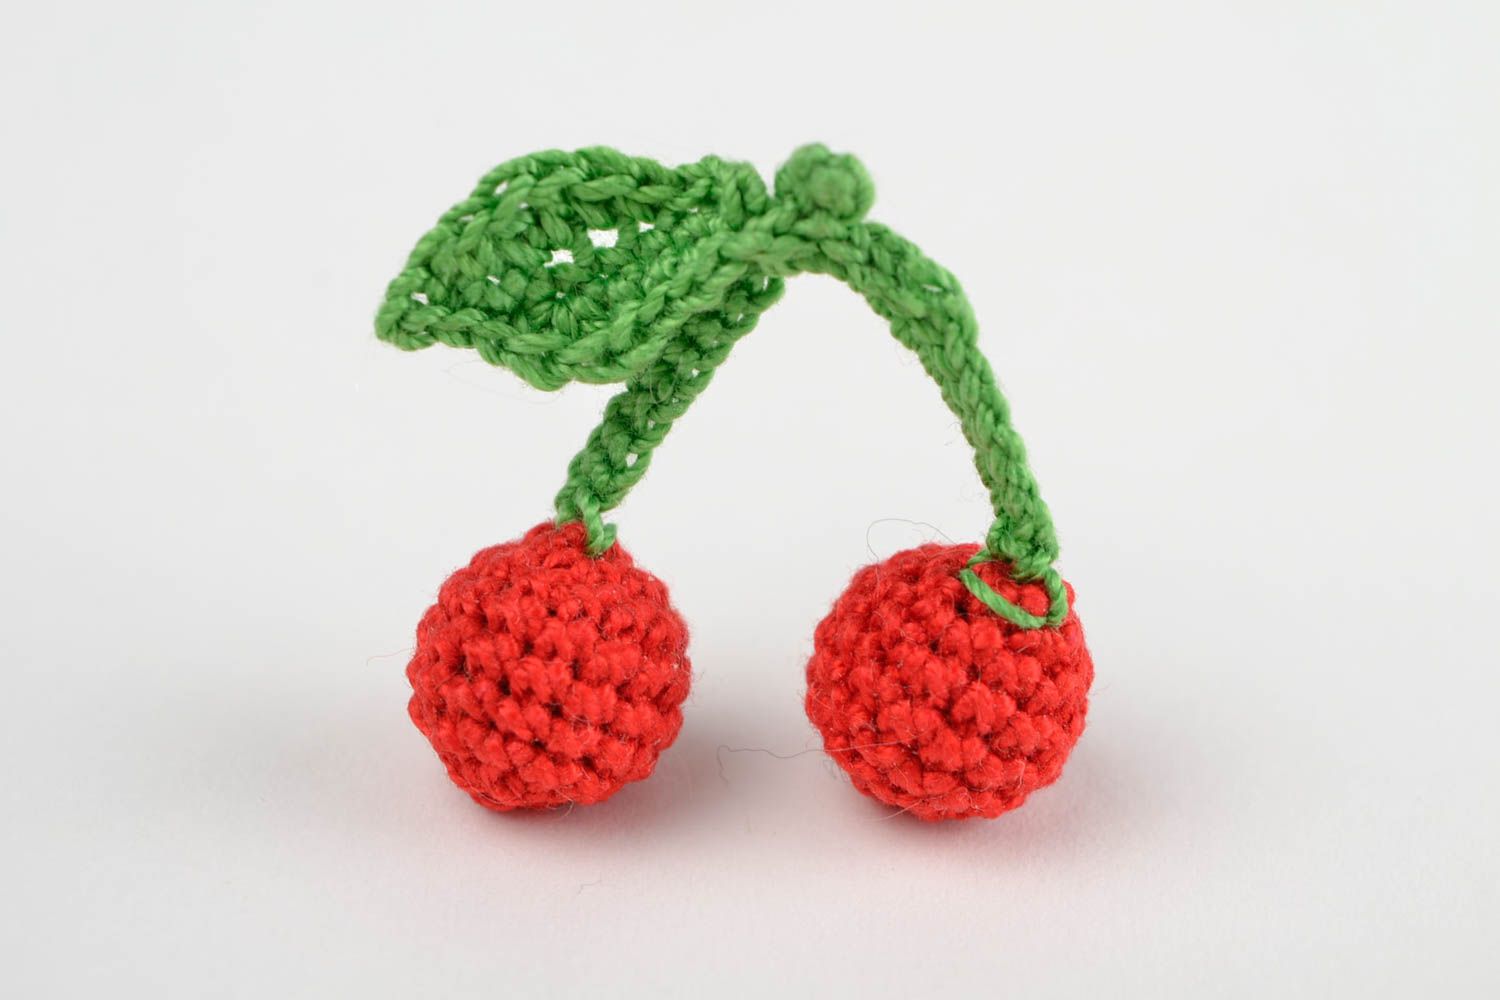 Handmade toy fruit toy unusual toys for children crocheted toy gift ideas photo 3